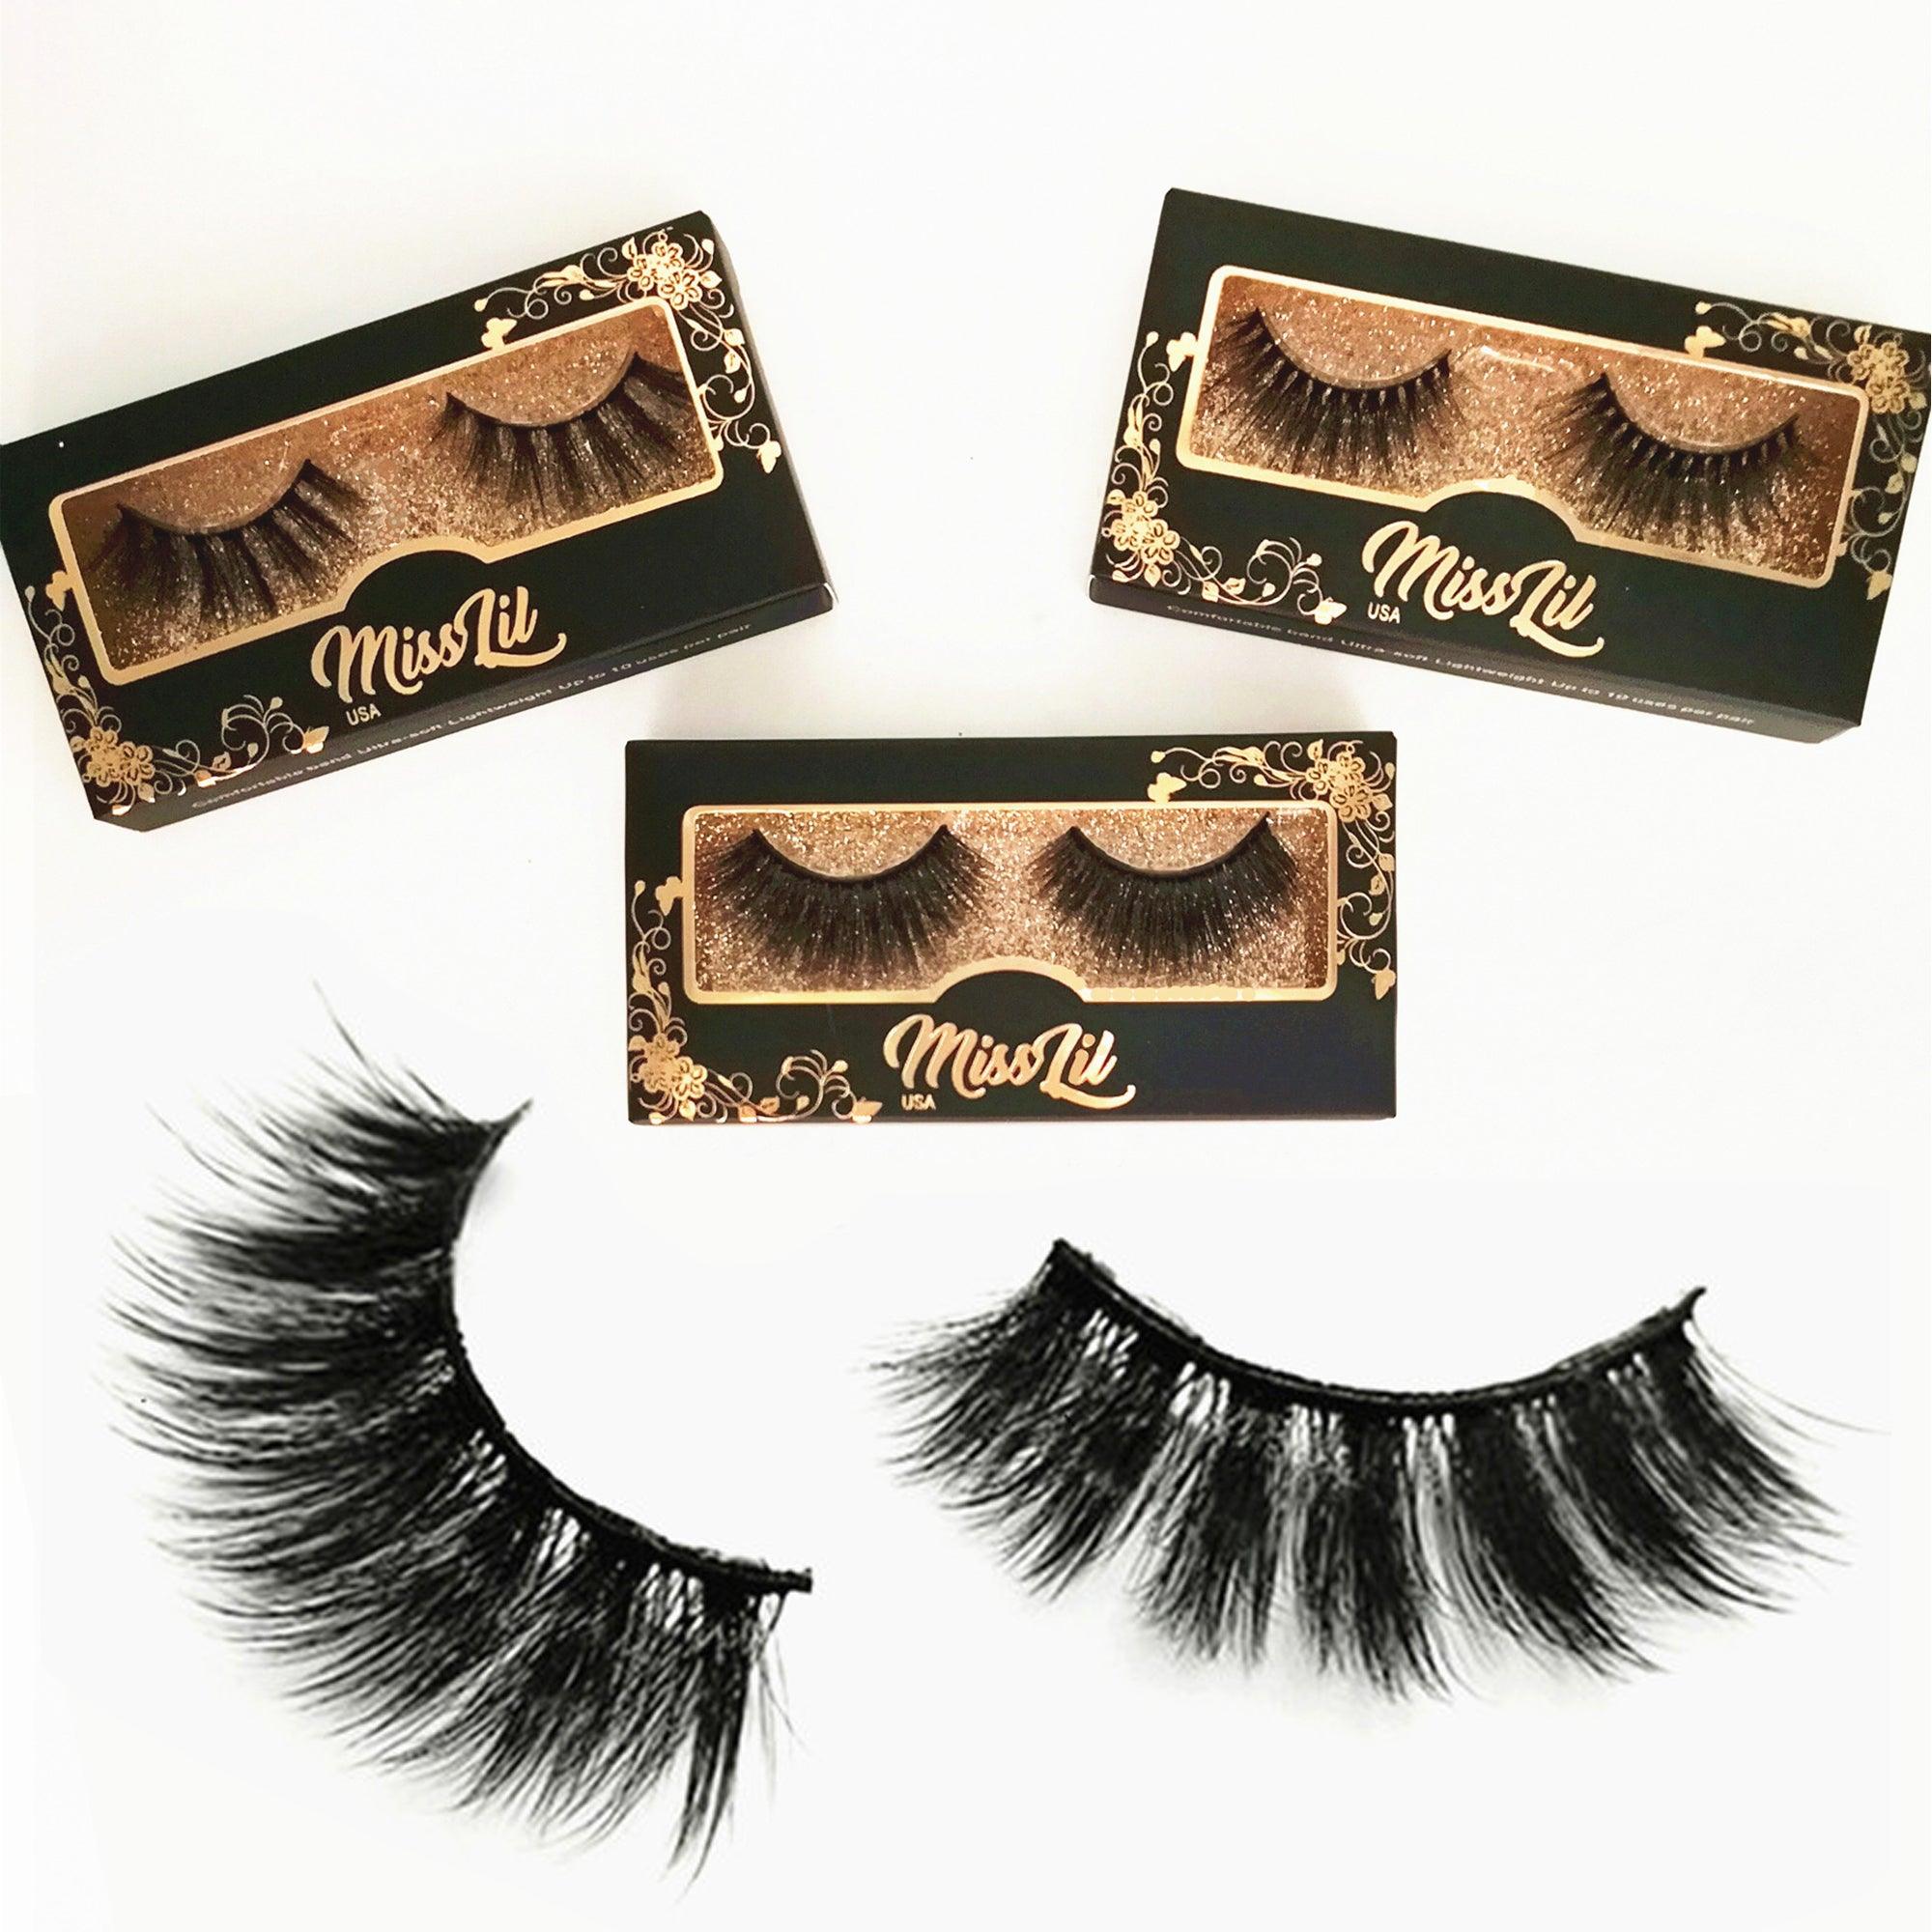 1-Pair Miss Lil USA Lashes #24 (Pack of 12) - Miss Lil USA Wholesale